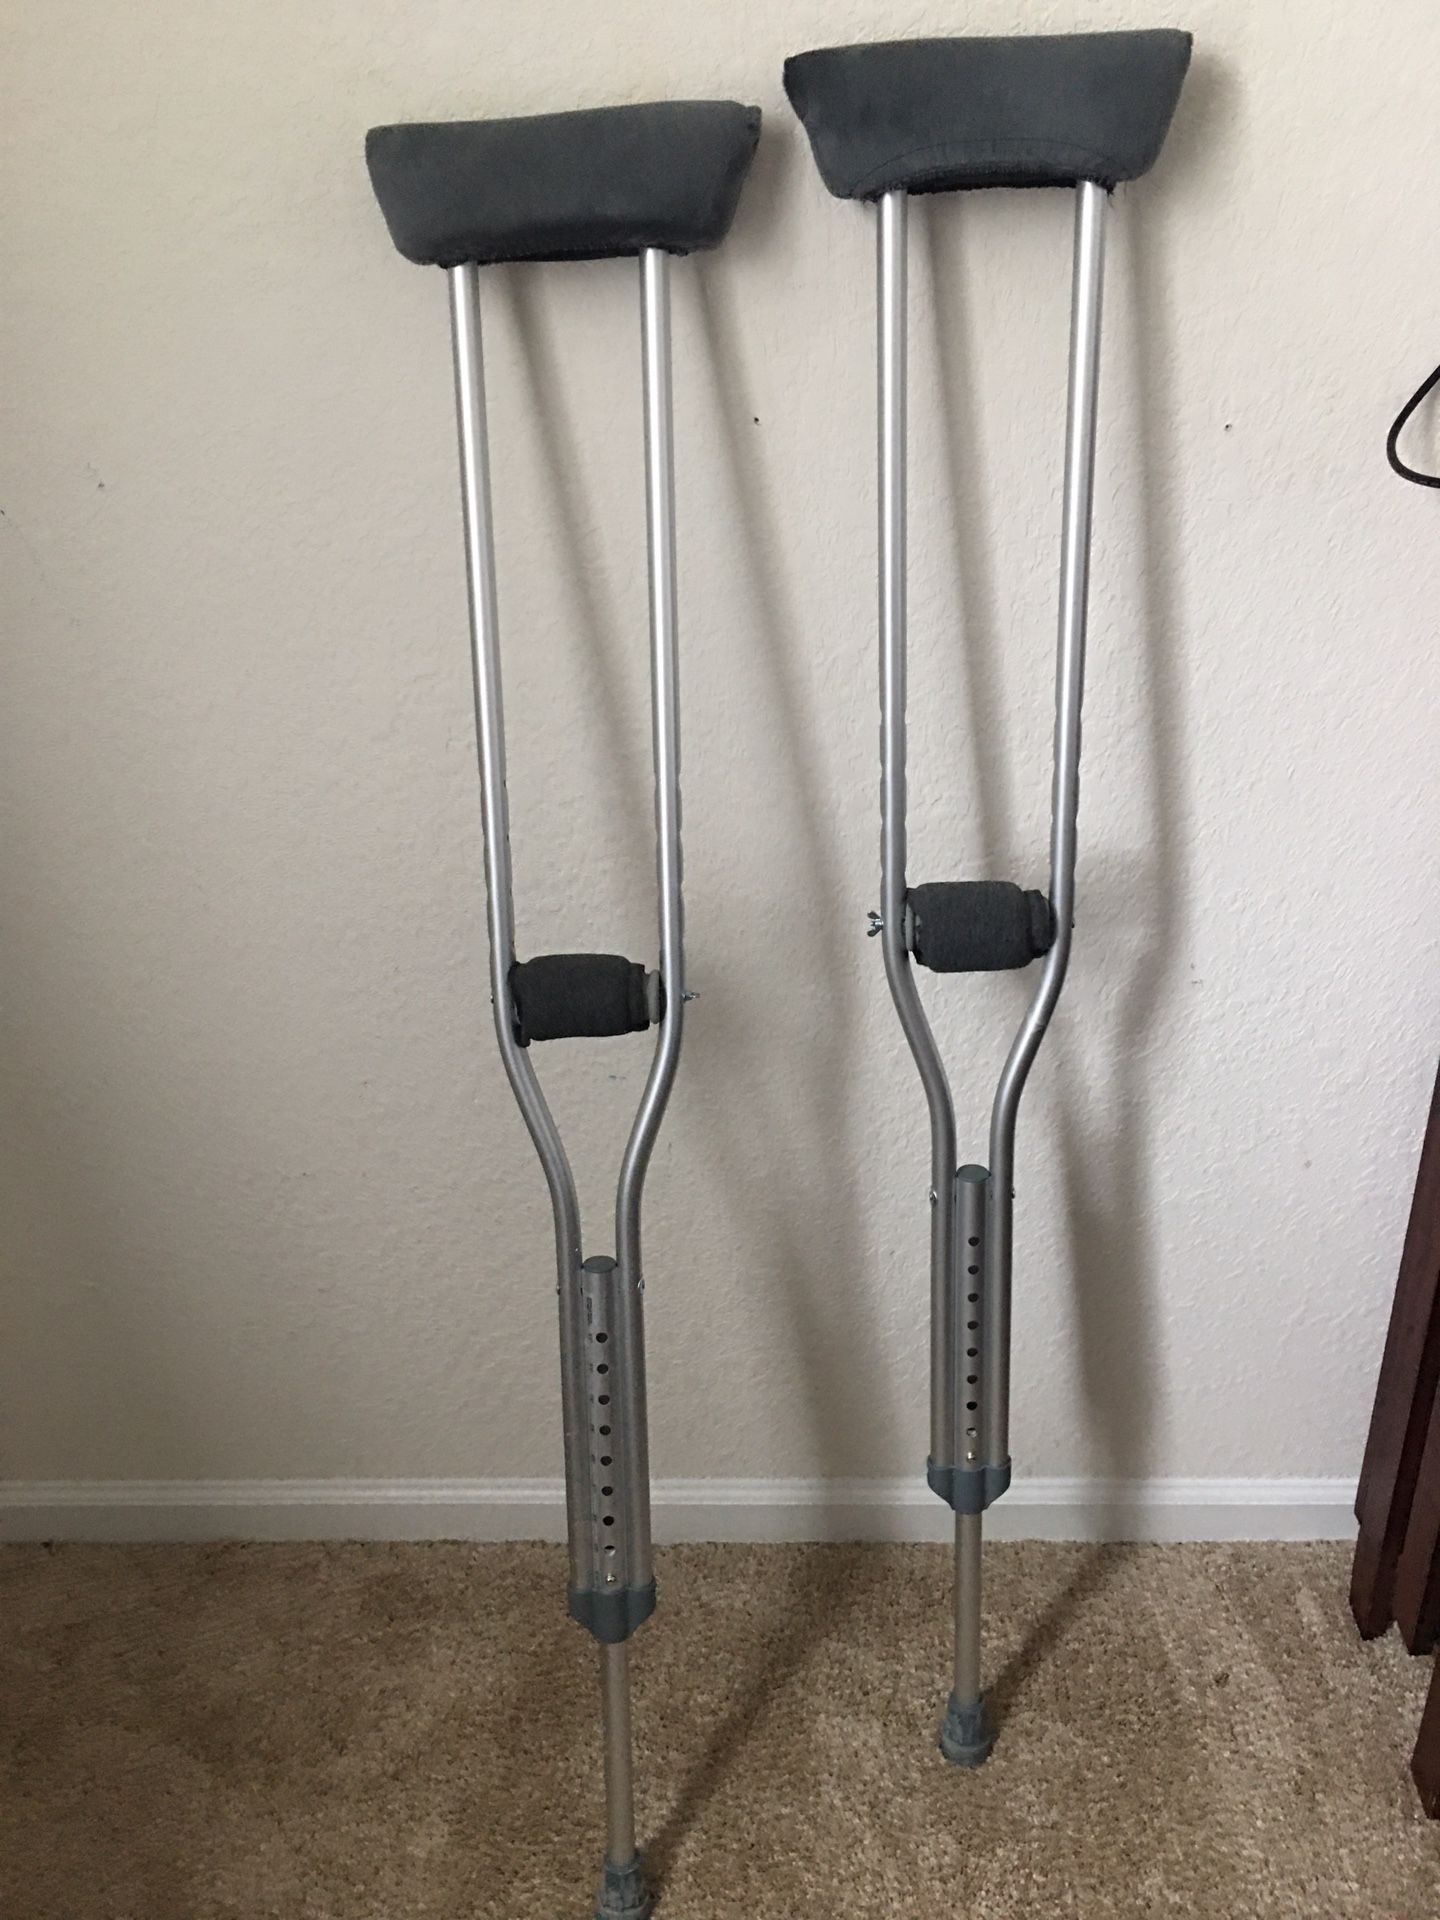 Crutches with comfort grip and under arm